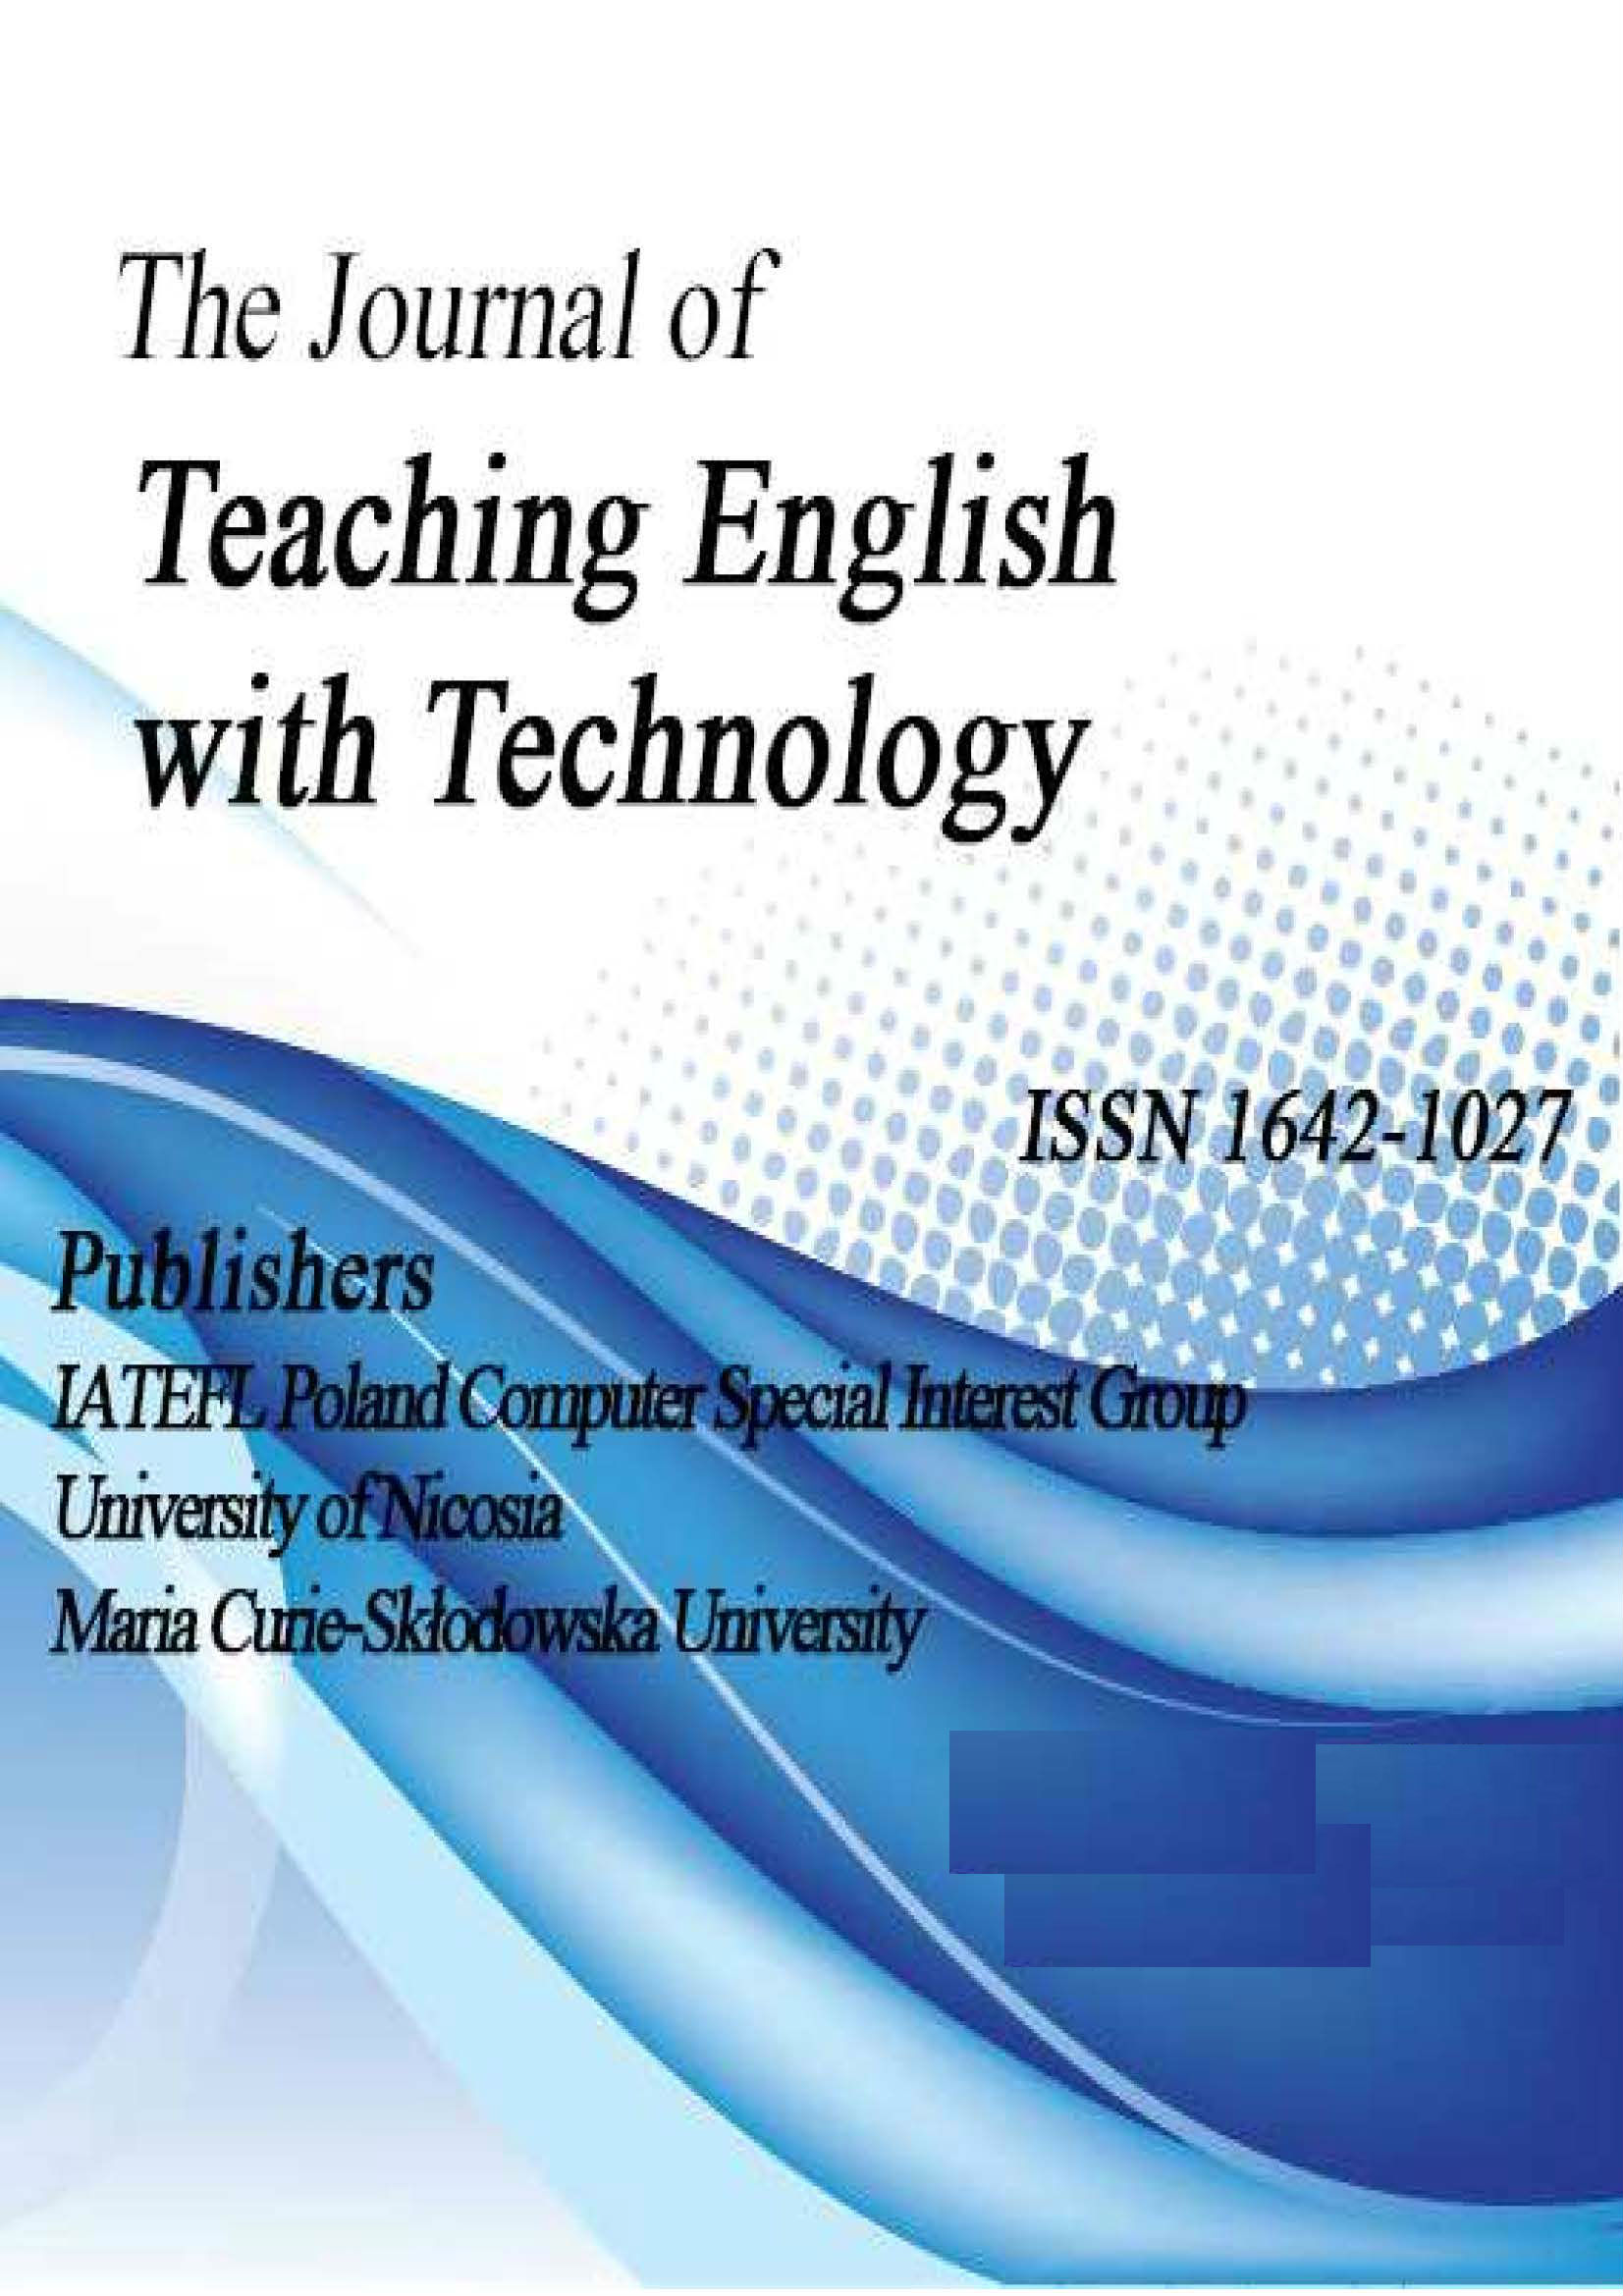 TOWARDS A BROAD-BASED UNDERSTANDING OF EFFECTIVE CALL PRACTICE: REACTIONS AND RECOMMENDATIONS OF UNIVERSITY-LEVEL MOROCCAN ENGLISH LANGUAGE LEARNERS Cover Image